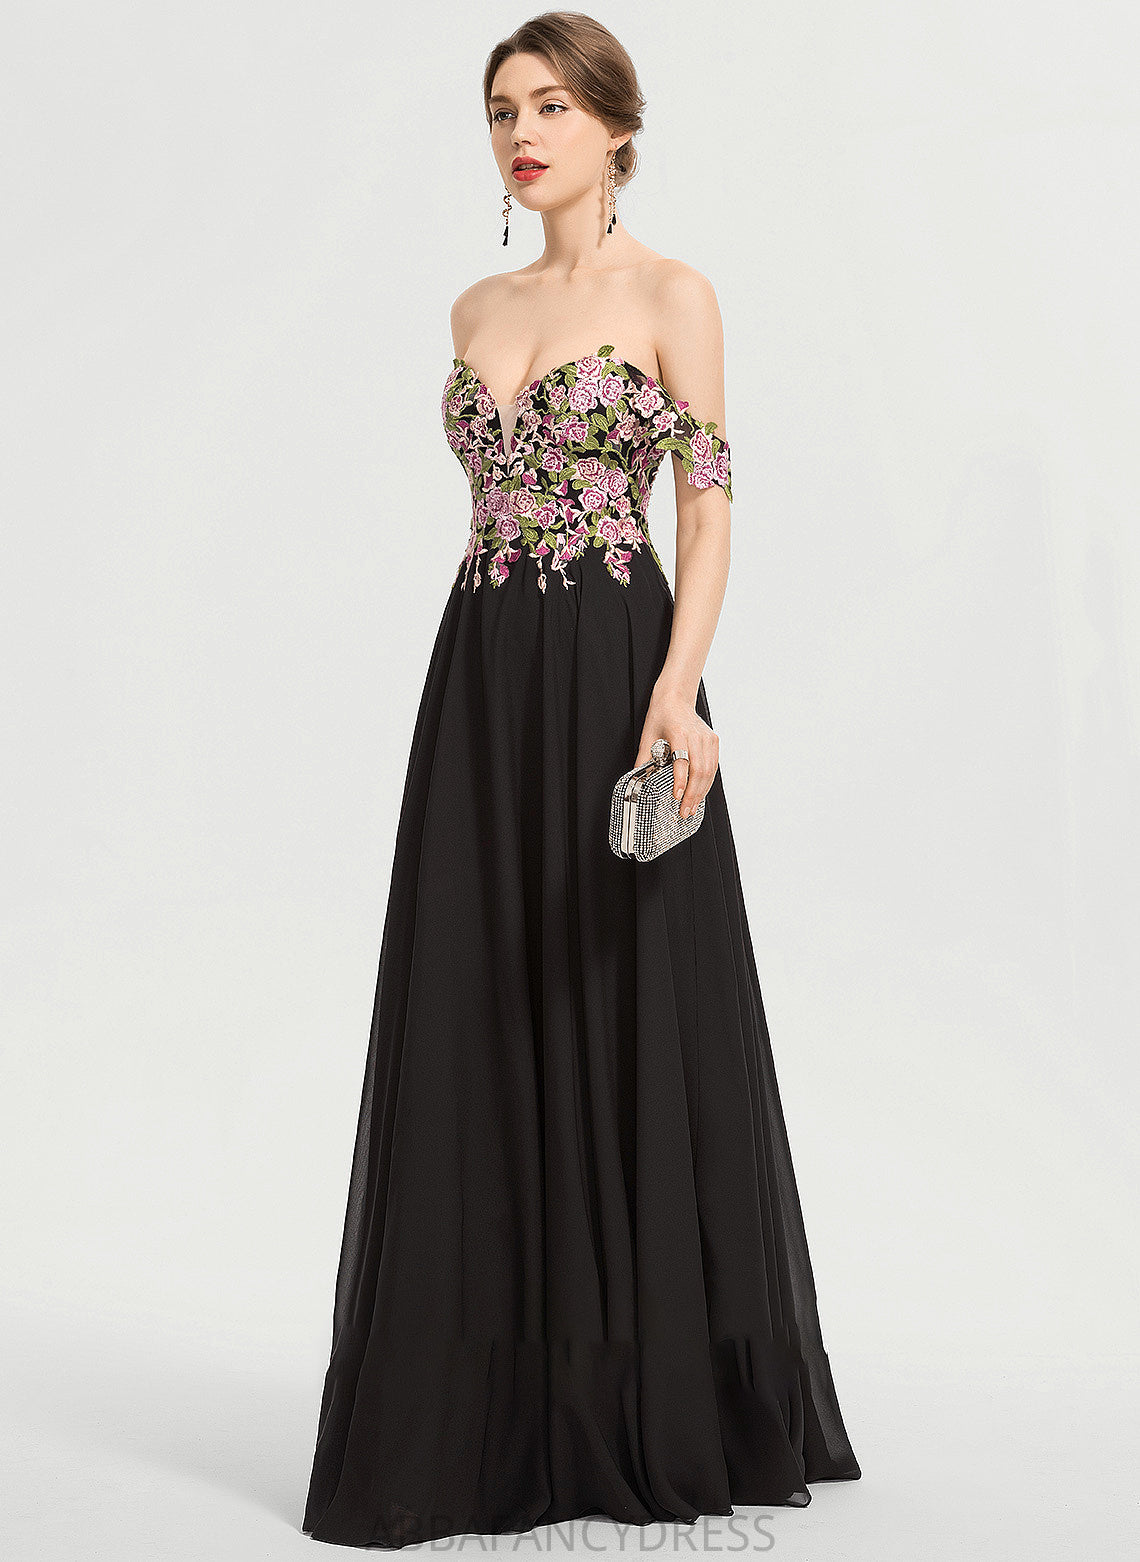 Off-the-Shoulder Chiffon Prom Dresses Ball-Gown/Princess London Floor-Length